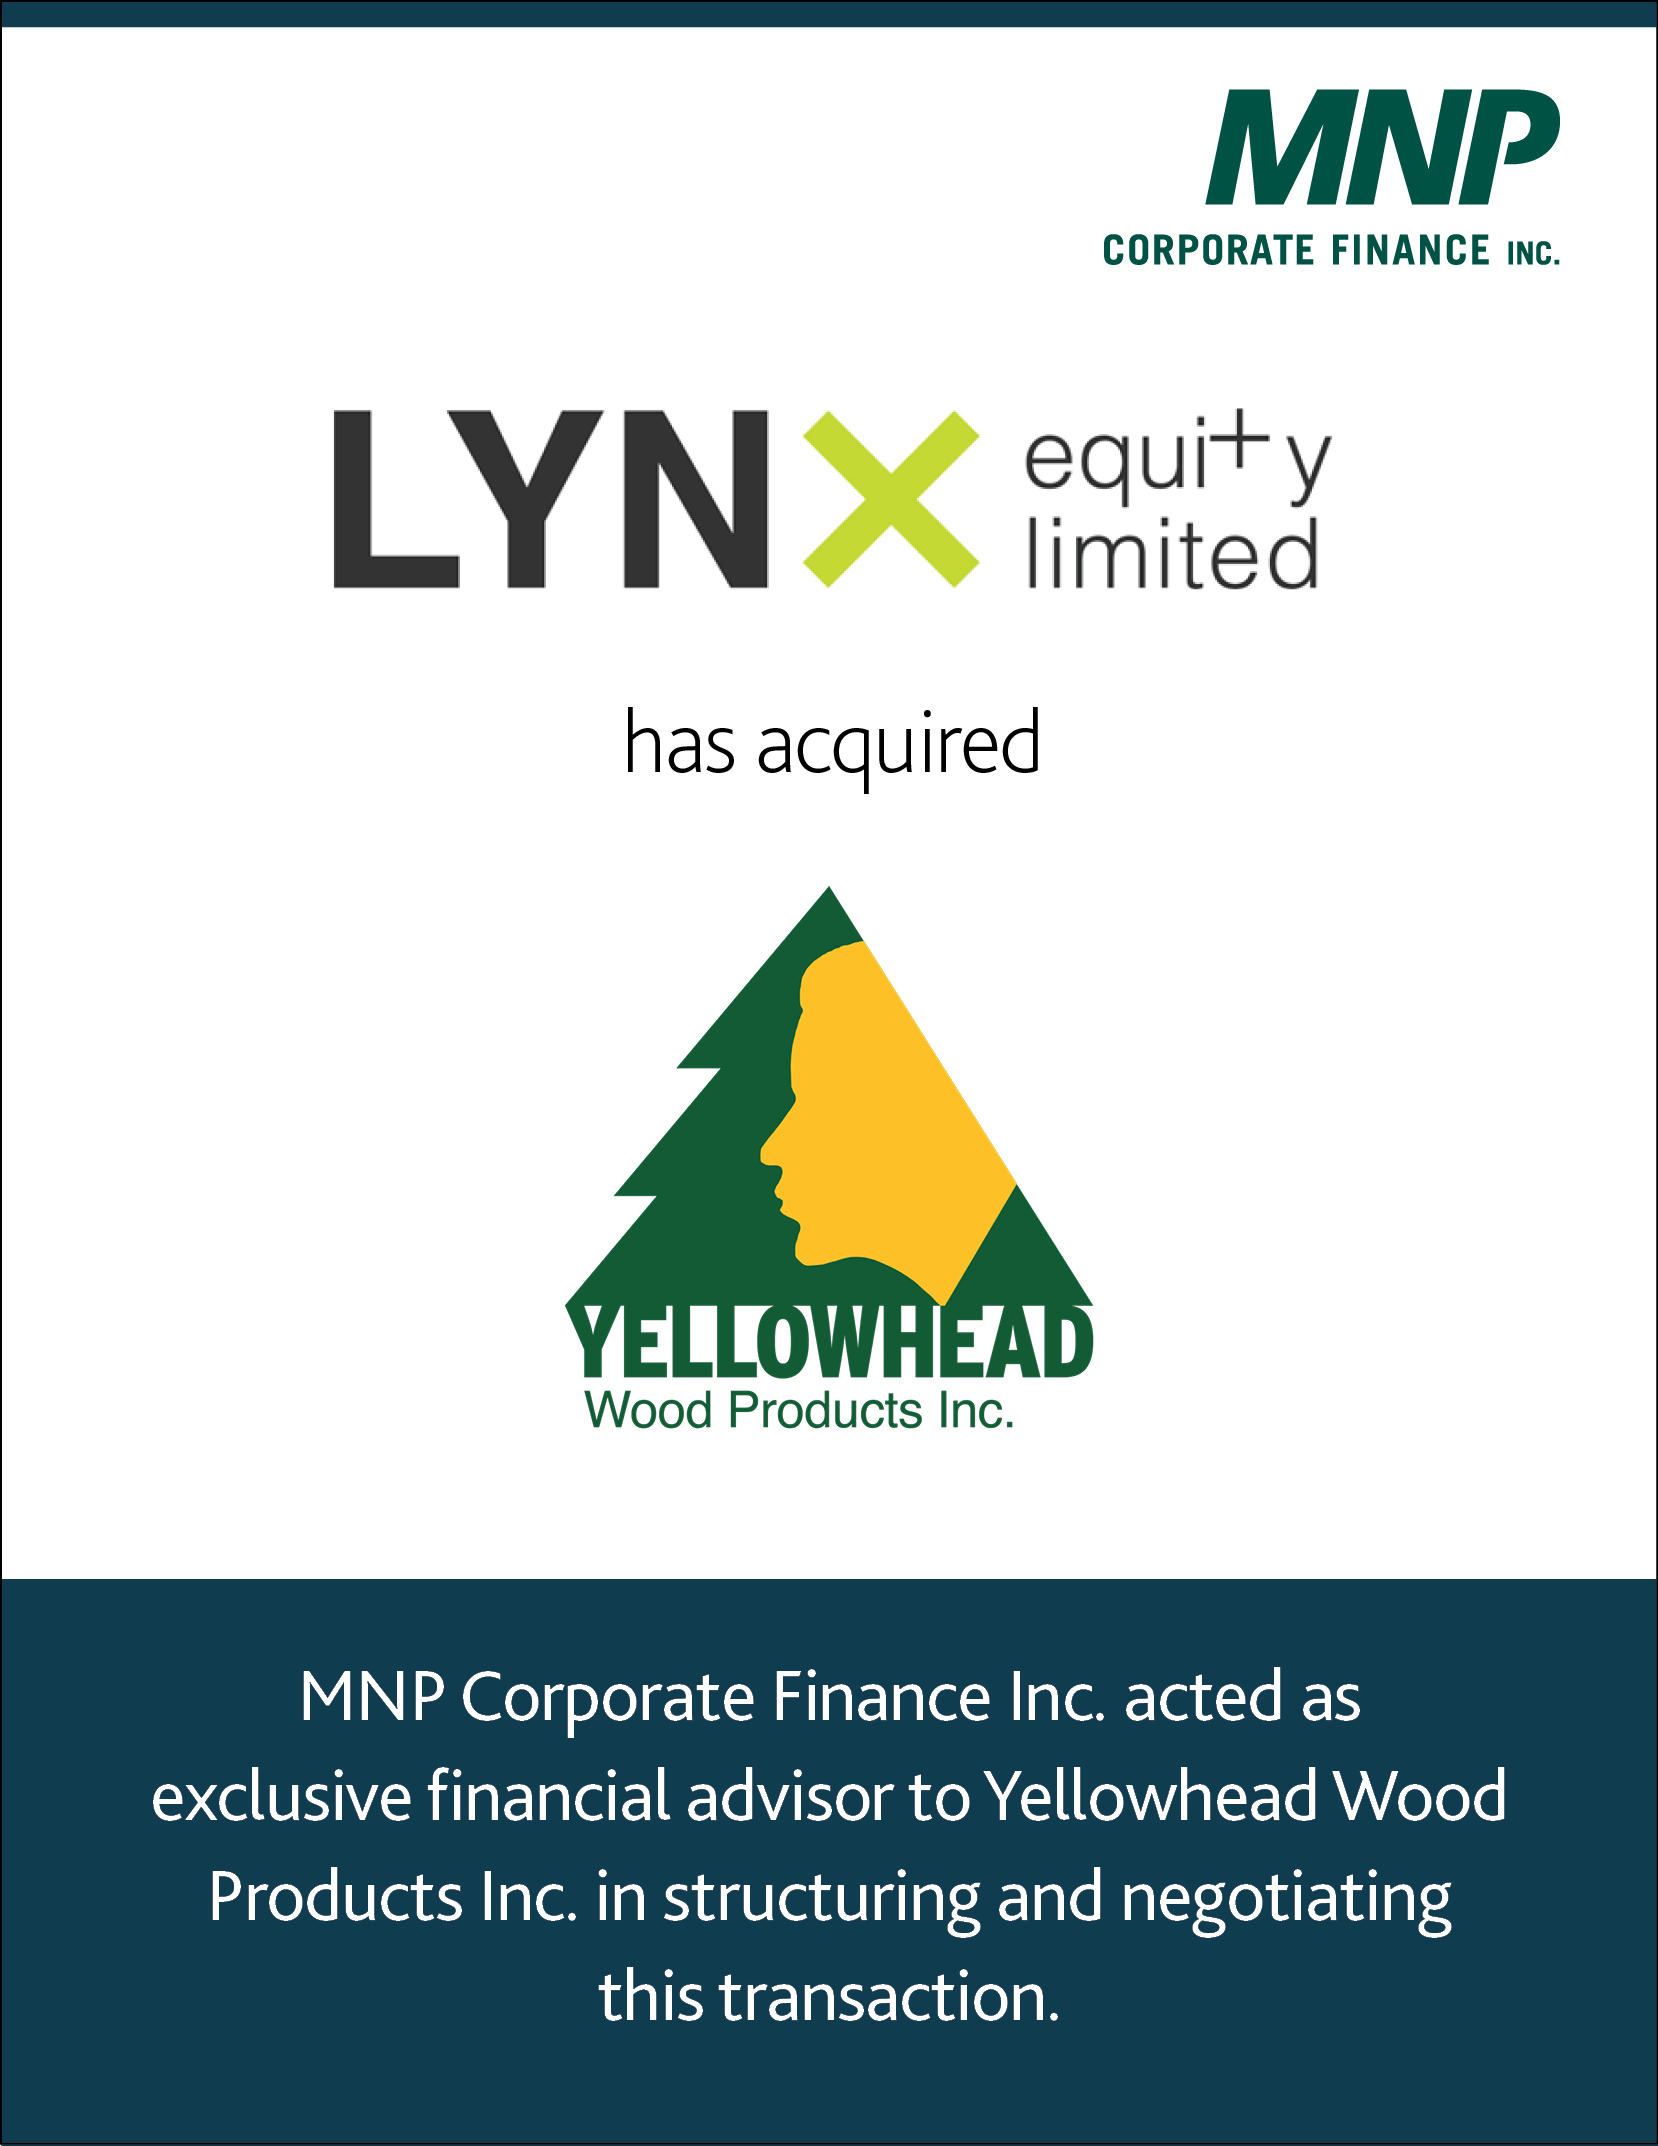 Lynx Equity Limited has acquired Yellowhead Wood Products Inc.